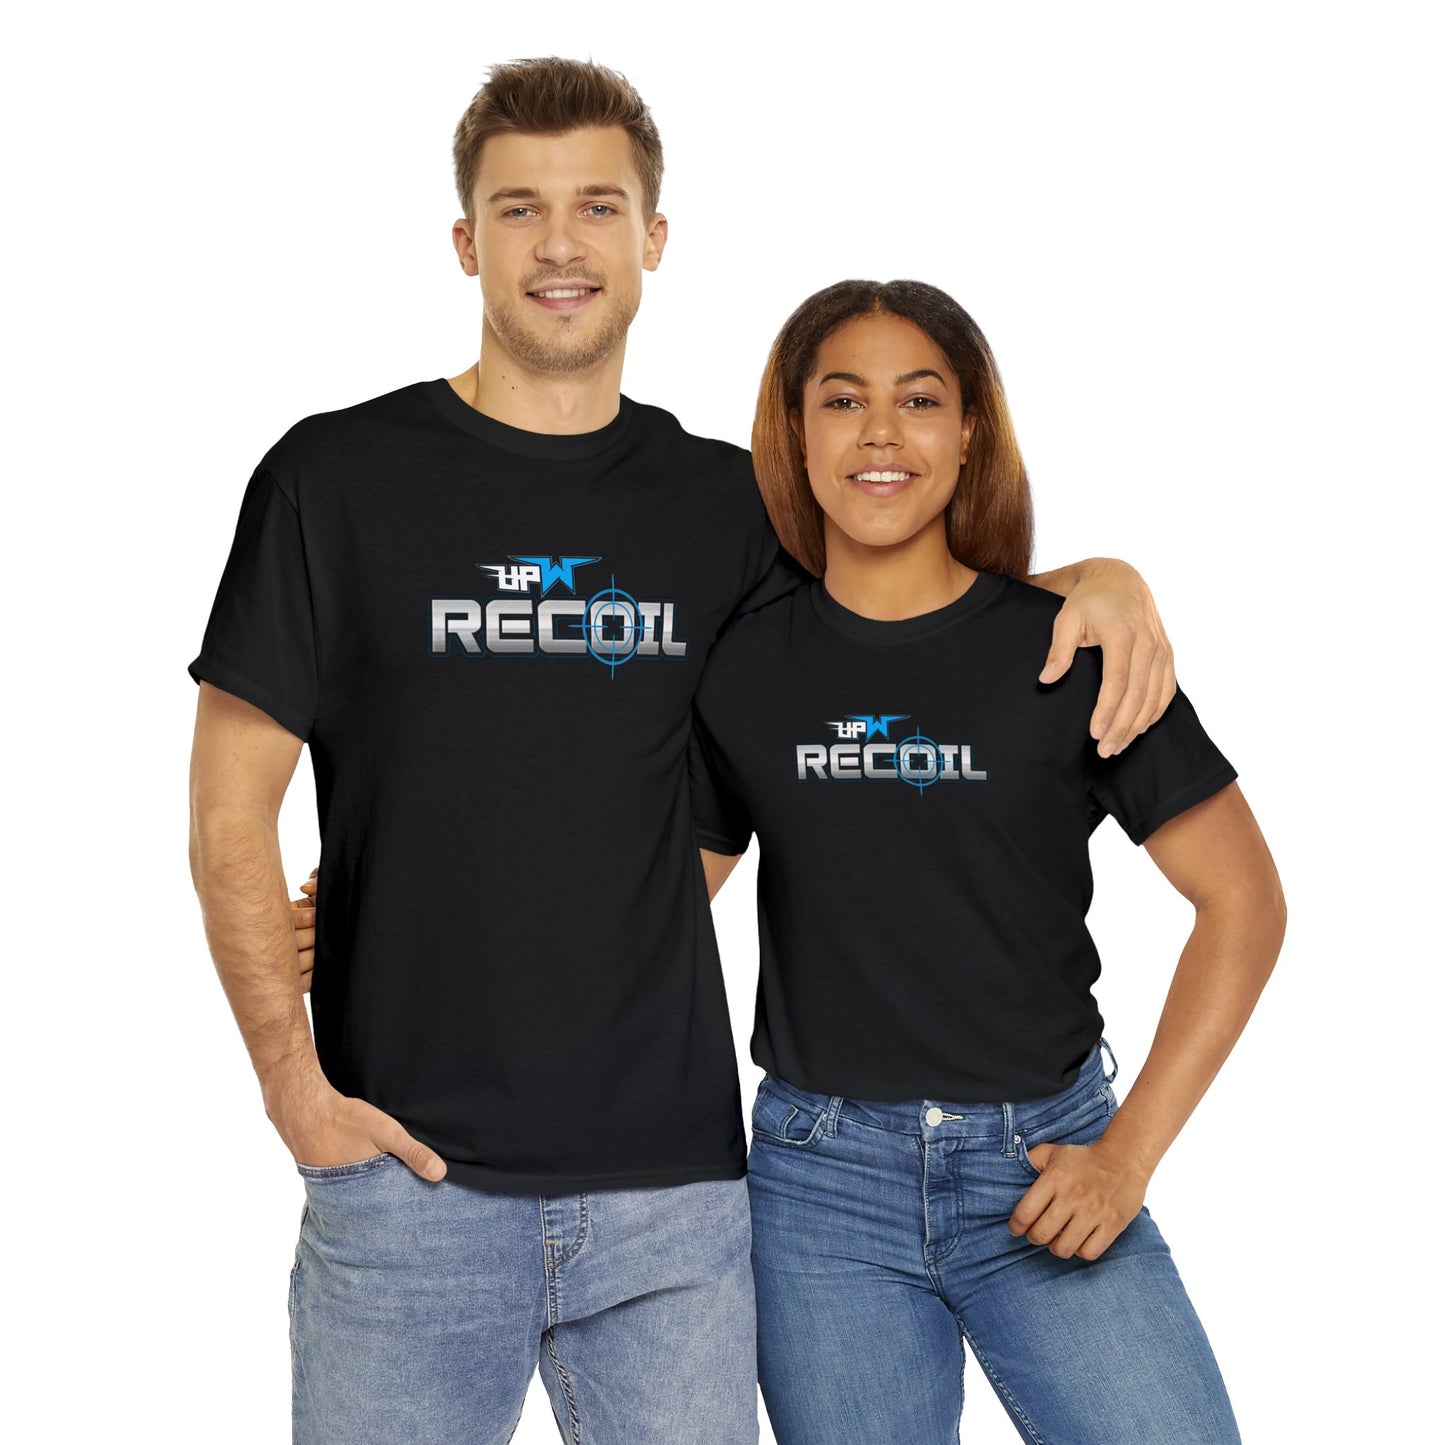 UPW RECOIL PRINTED TEE